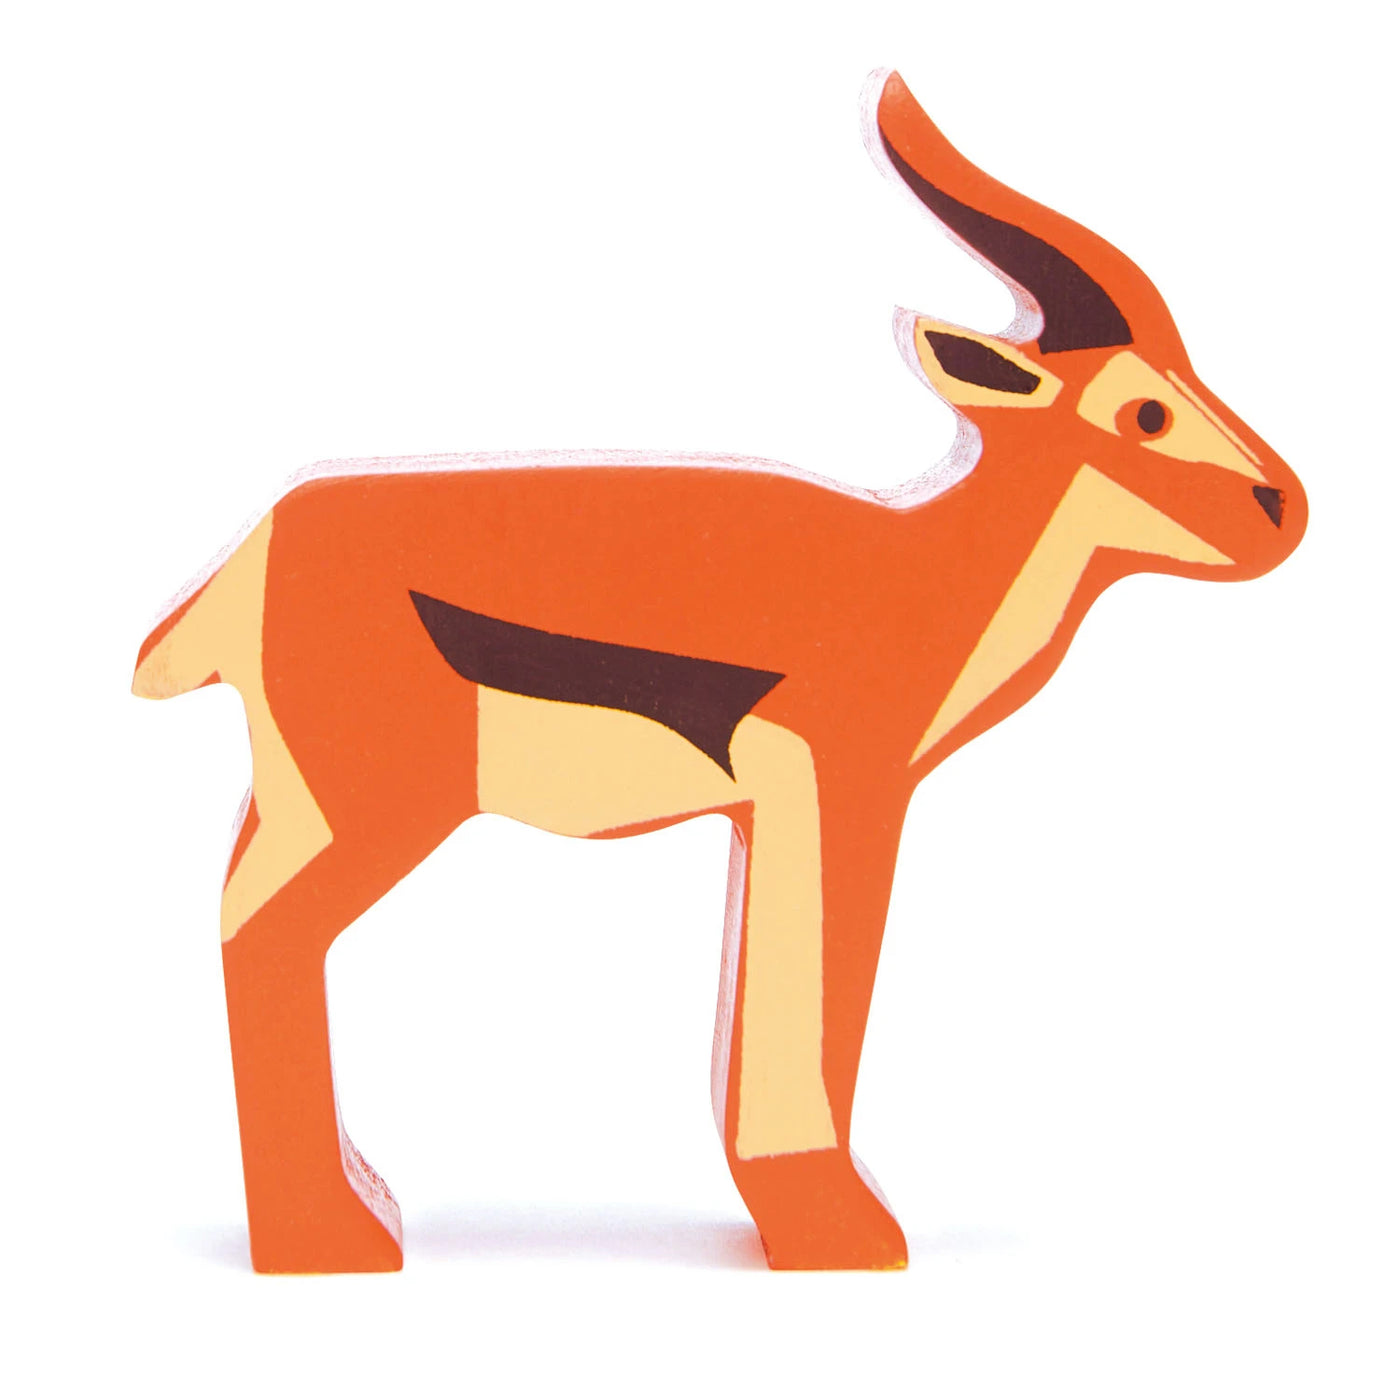 Wooden safari antelope toy for kids made of eco-friendly wood